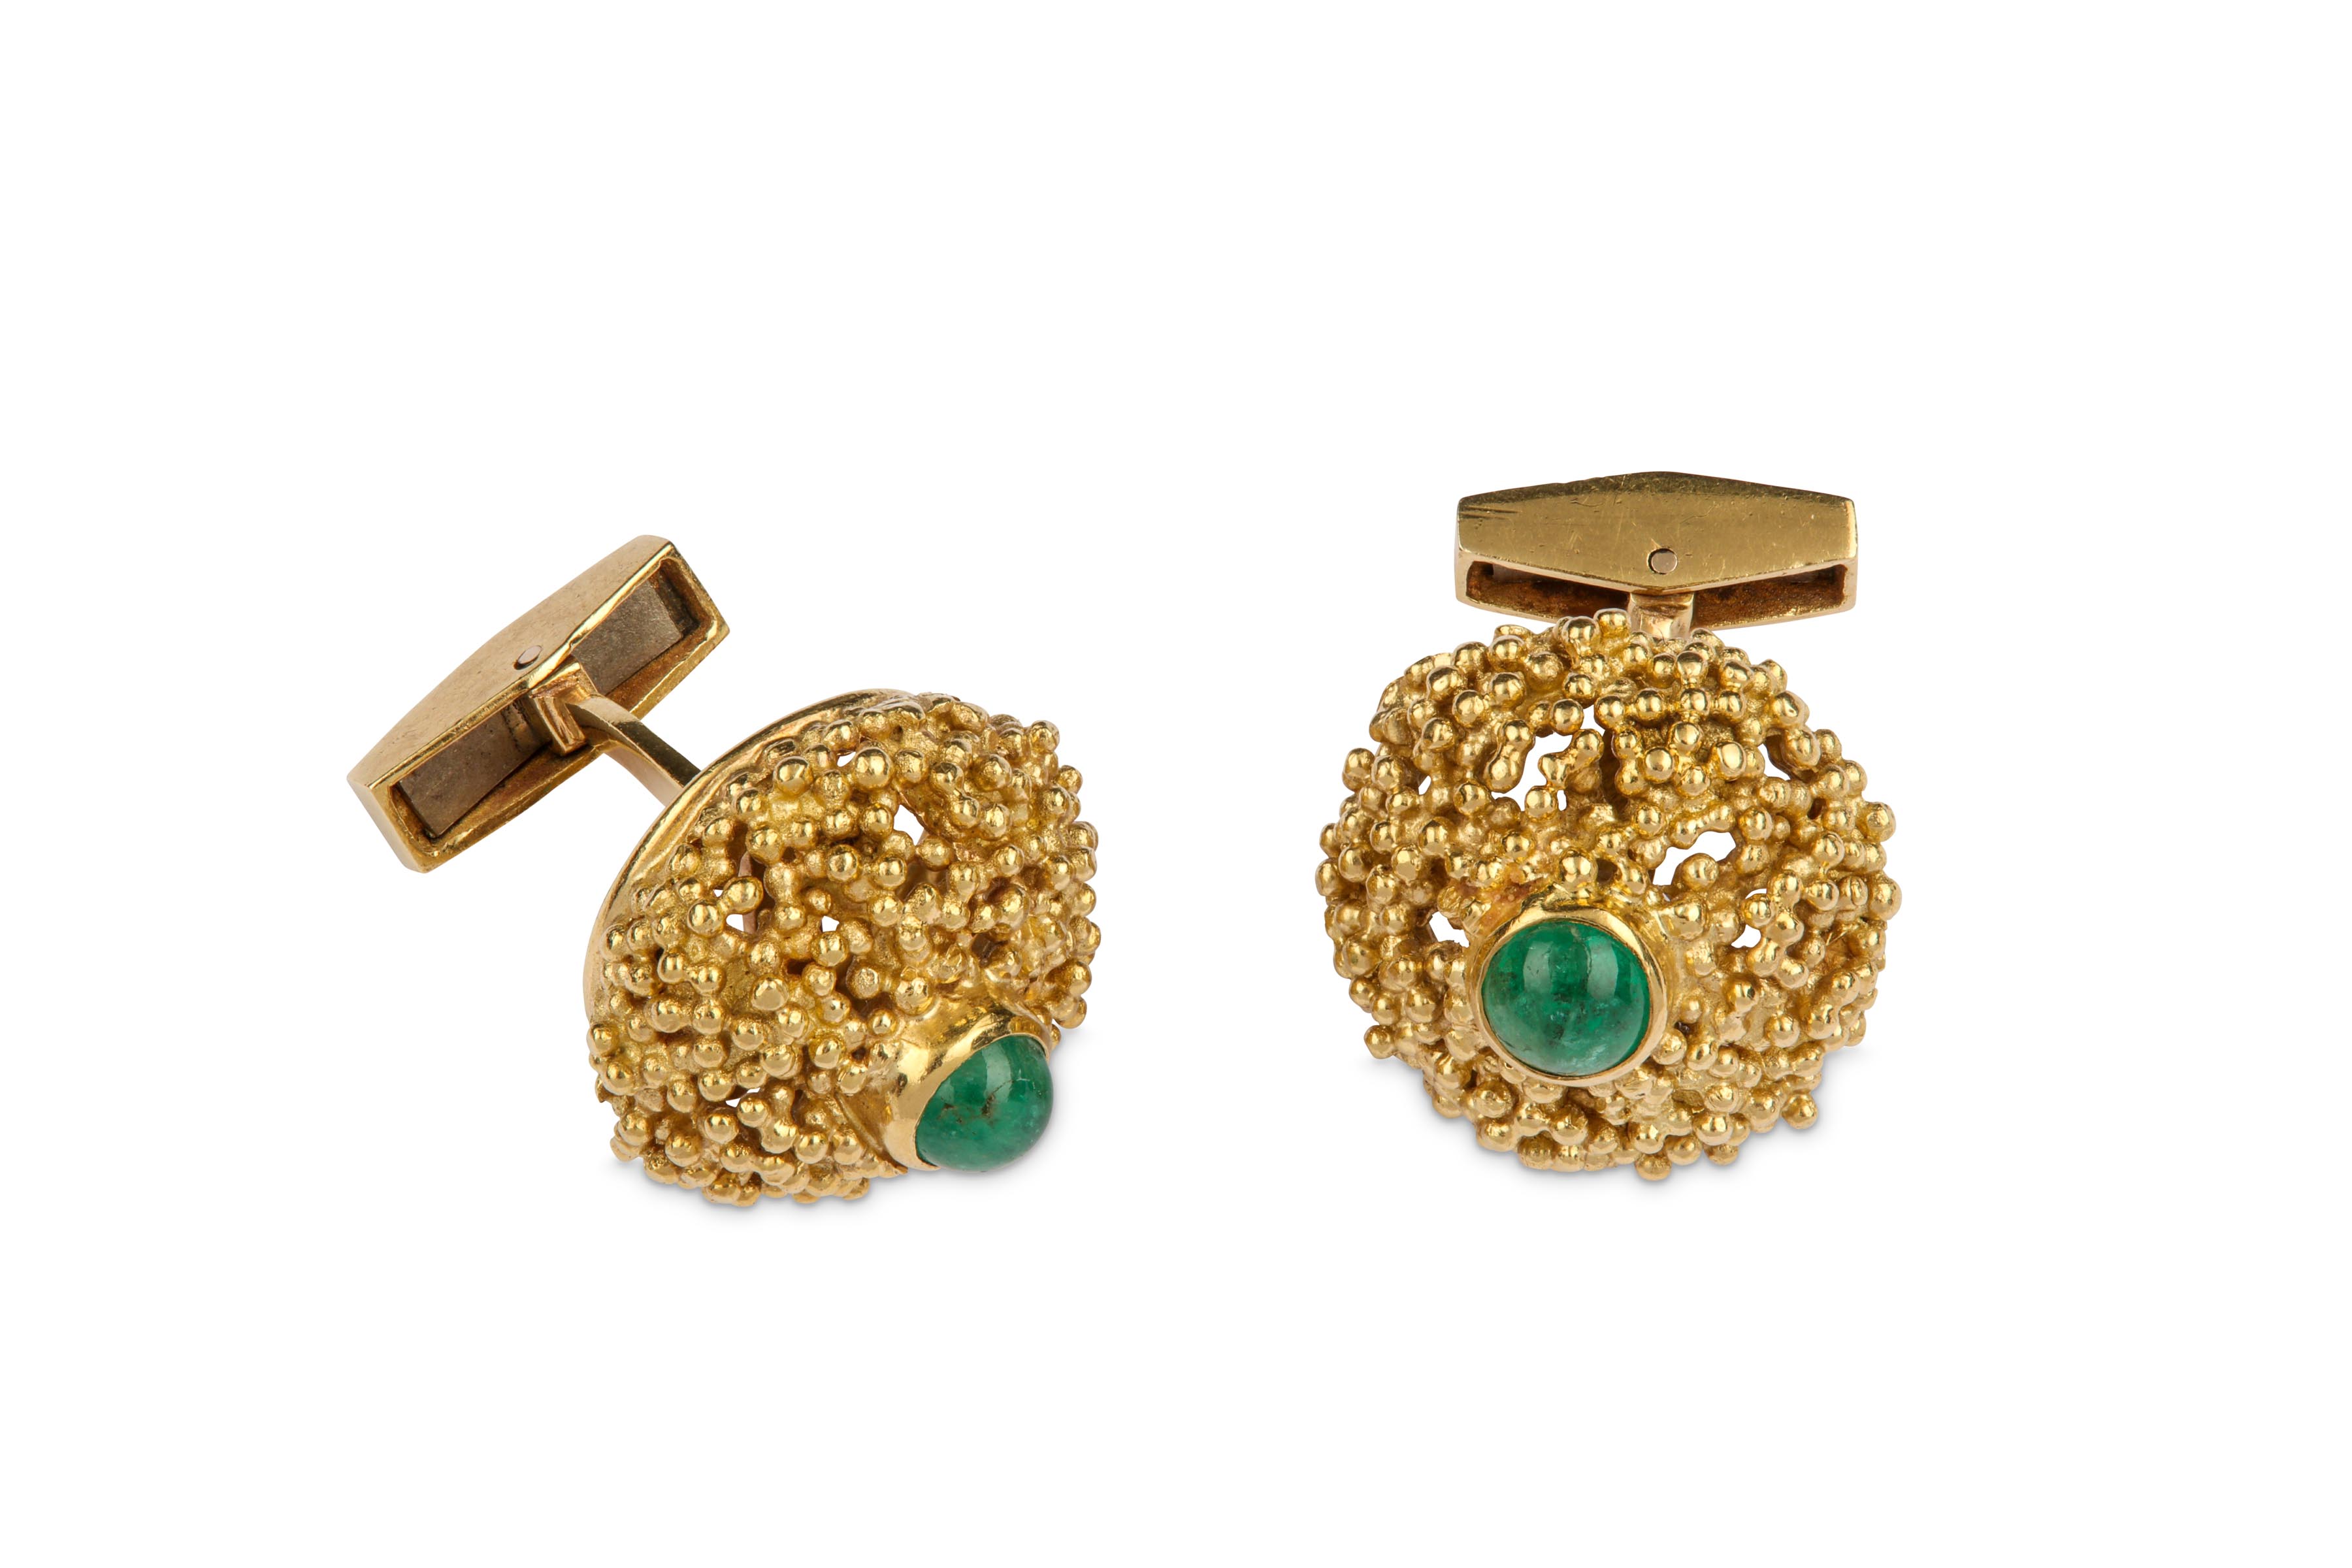 A pair of gold and emerald cufflinks, by Ben Rosenfeld, 1969